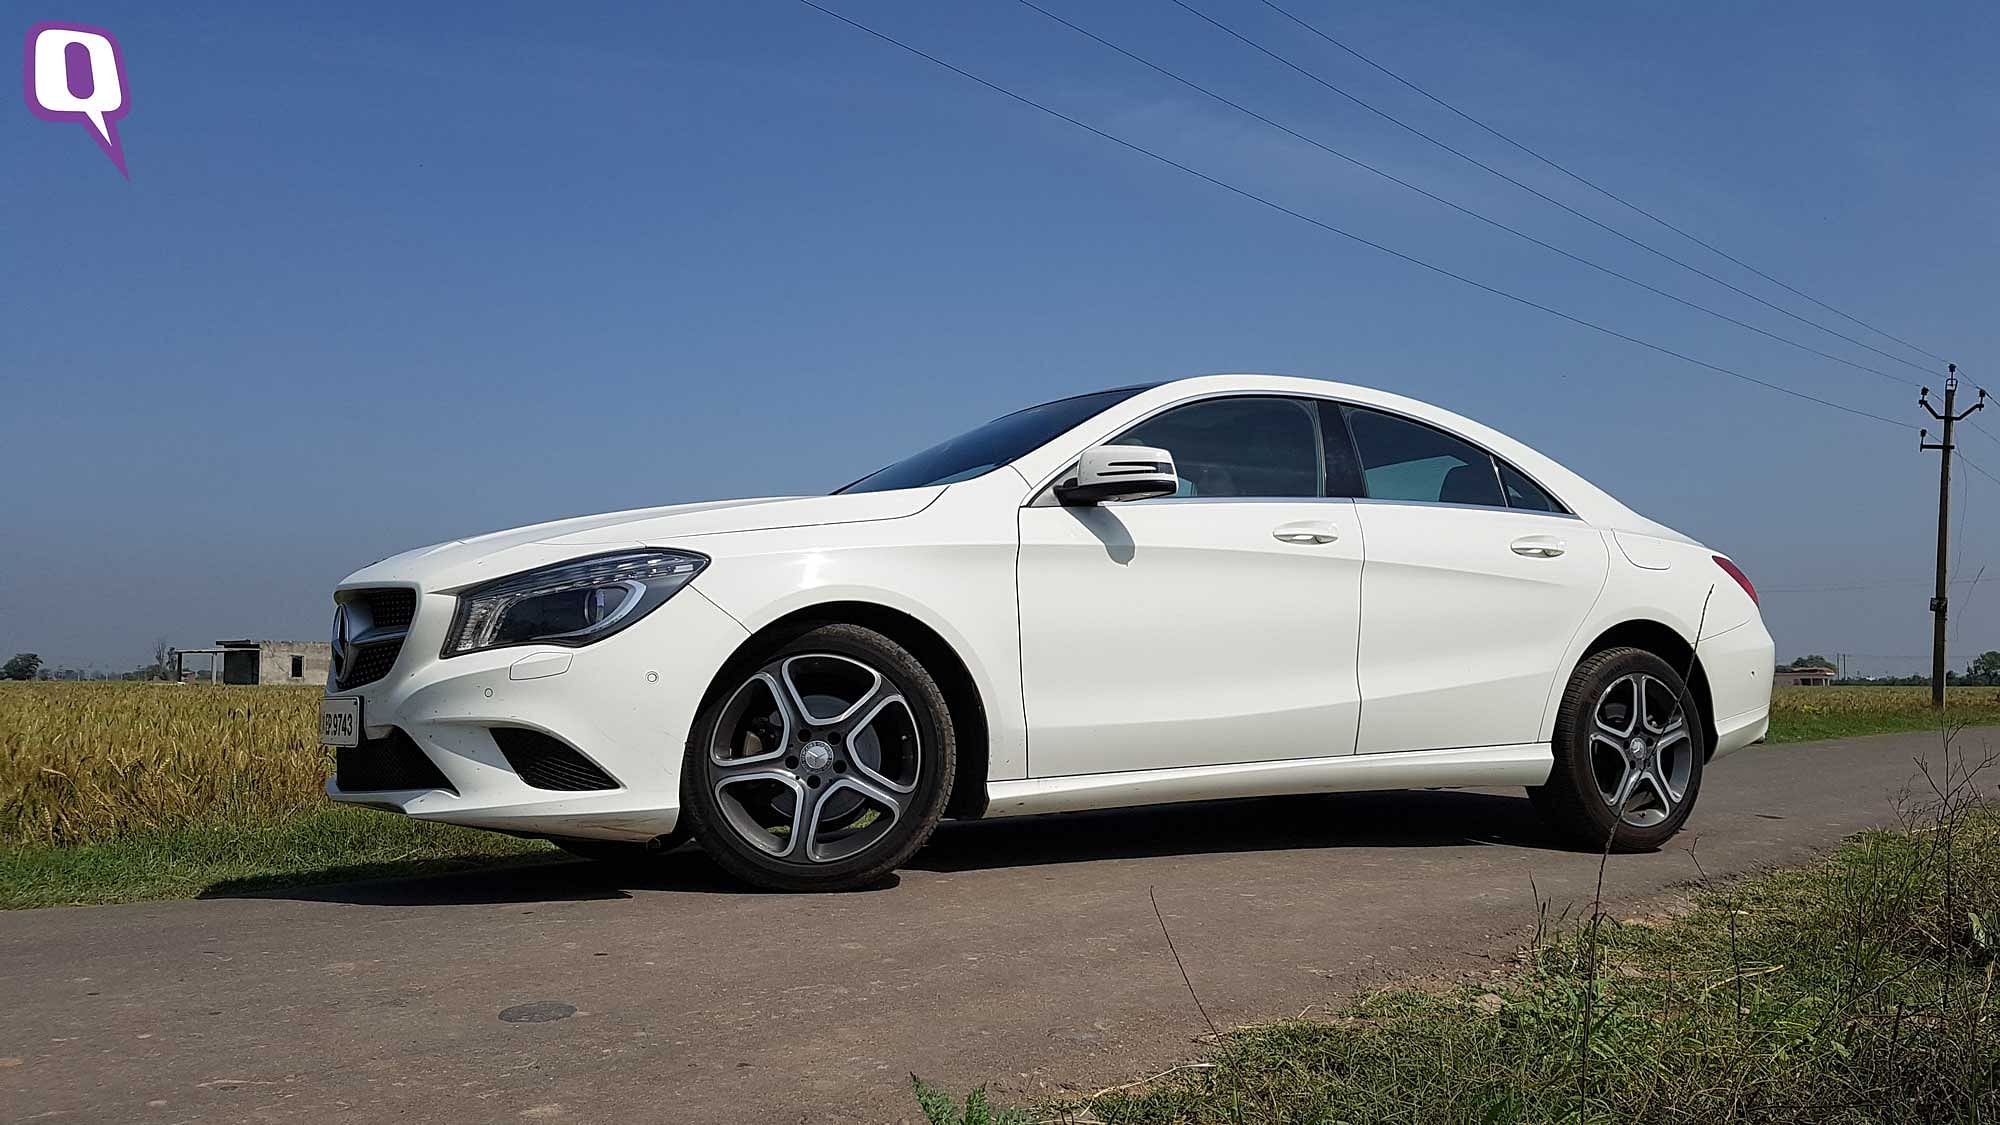 At 4630 mm the Mercedes-Benz CLA 200 longer than its rival the Audi A3. (Photo: <b>The Quint</b>)